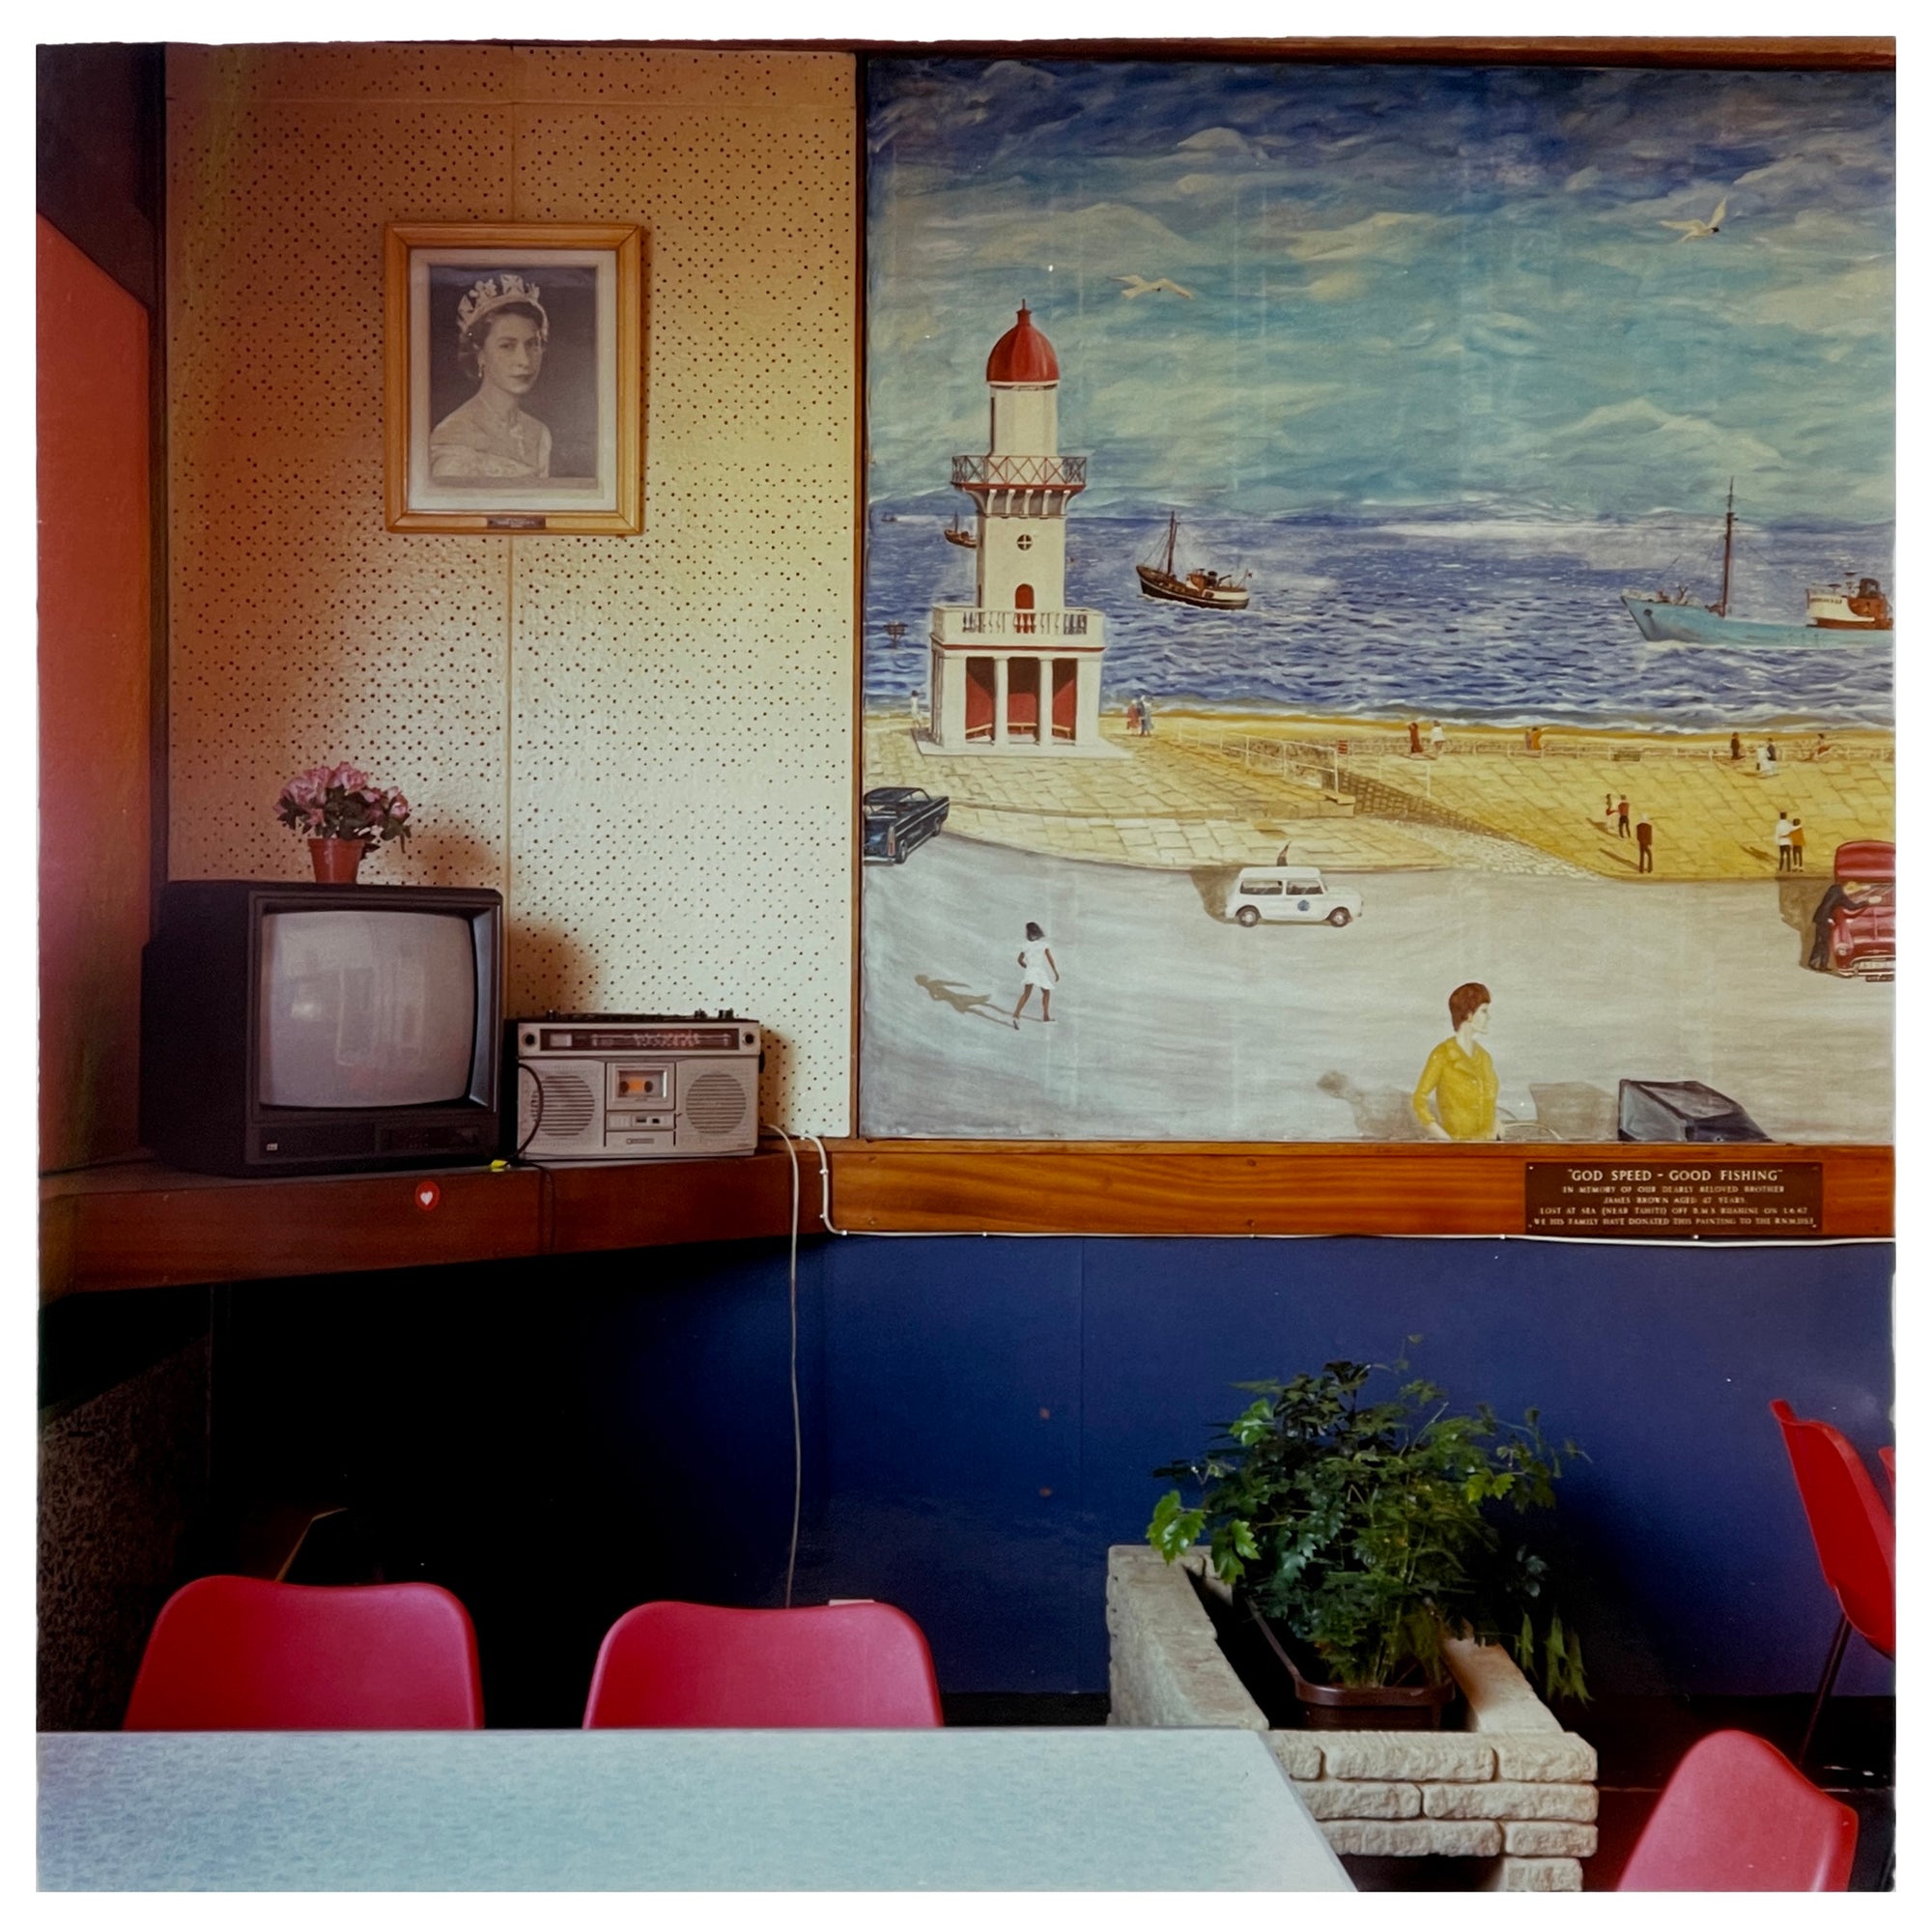 Photograph by Richard Heeps. This photo from 1986 is taken in a cafe which has a picture of Fleetwood beach erected In Memoriam which hangs next to a picture of Queen Elizabeth II.  Below is a shelf with a television and alongside that a radio.  In the room are cafe-style plastic seating and chairs.  